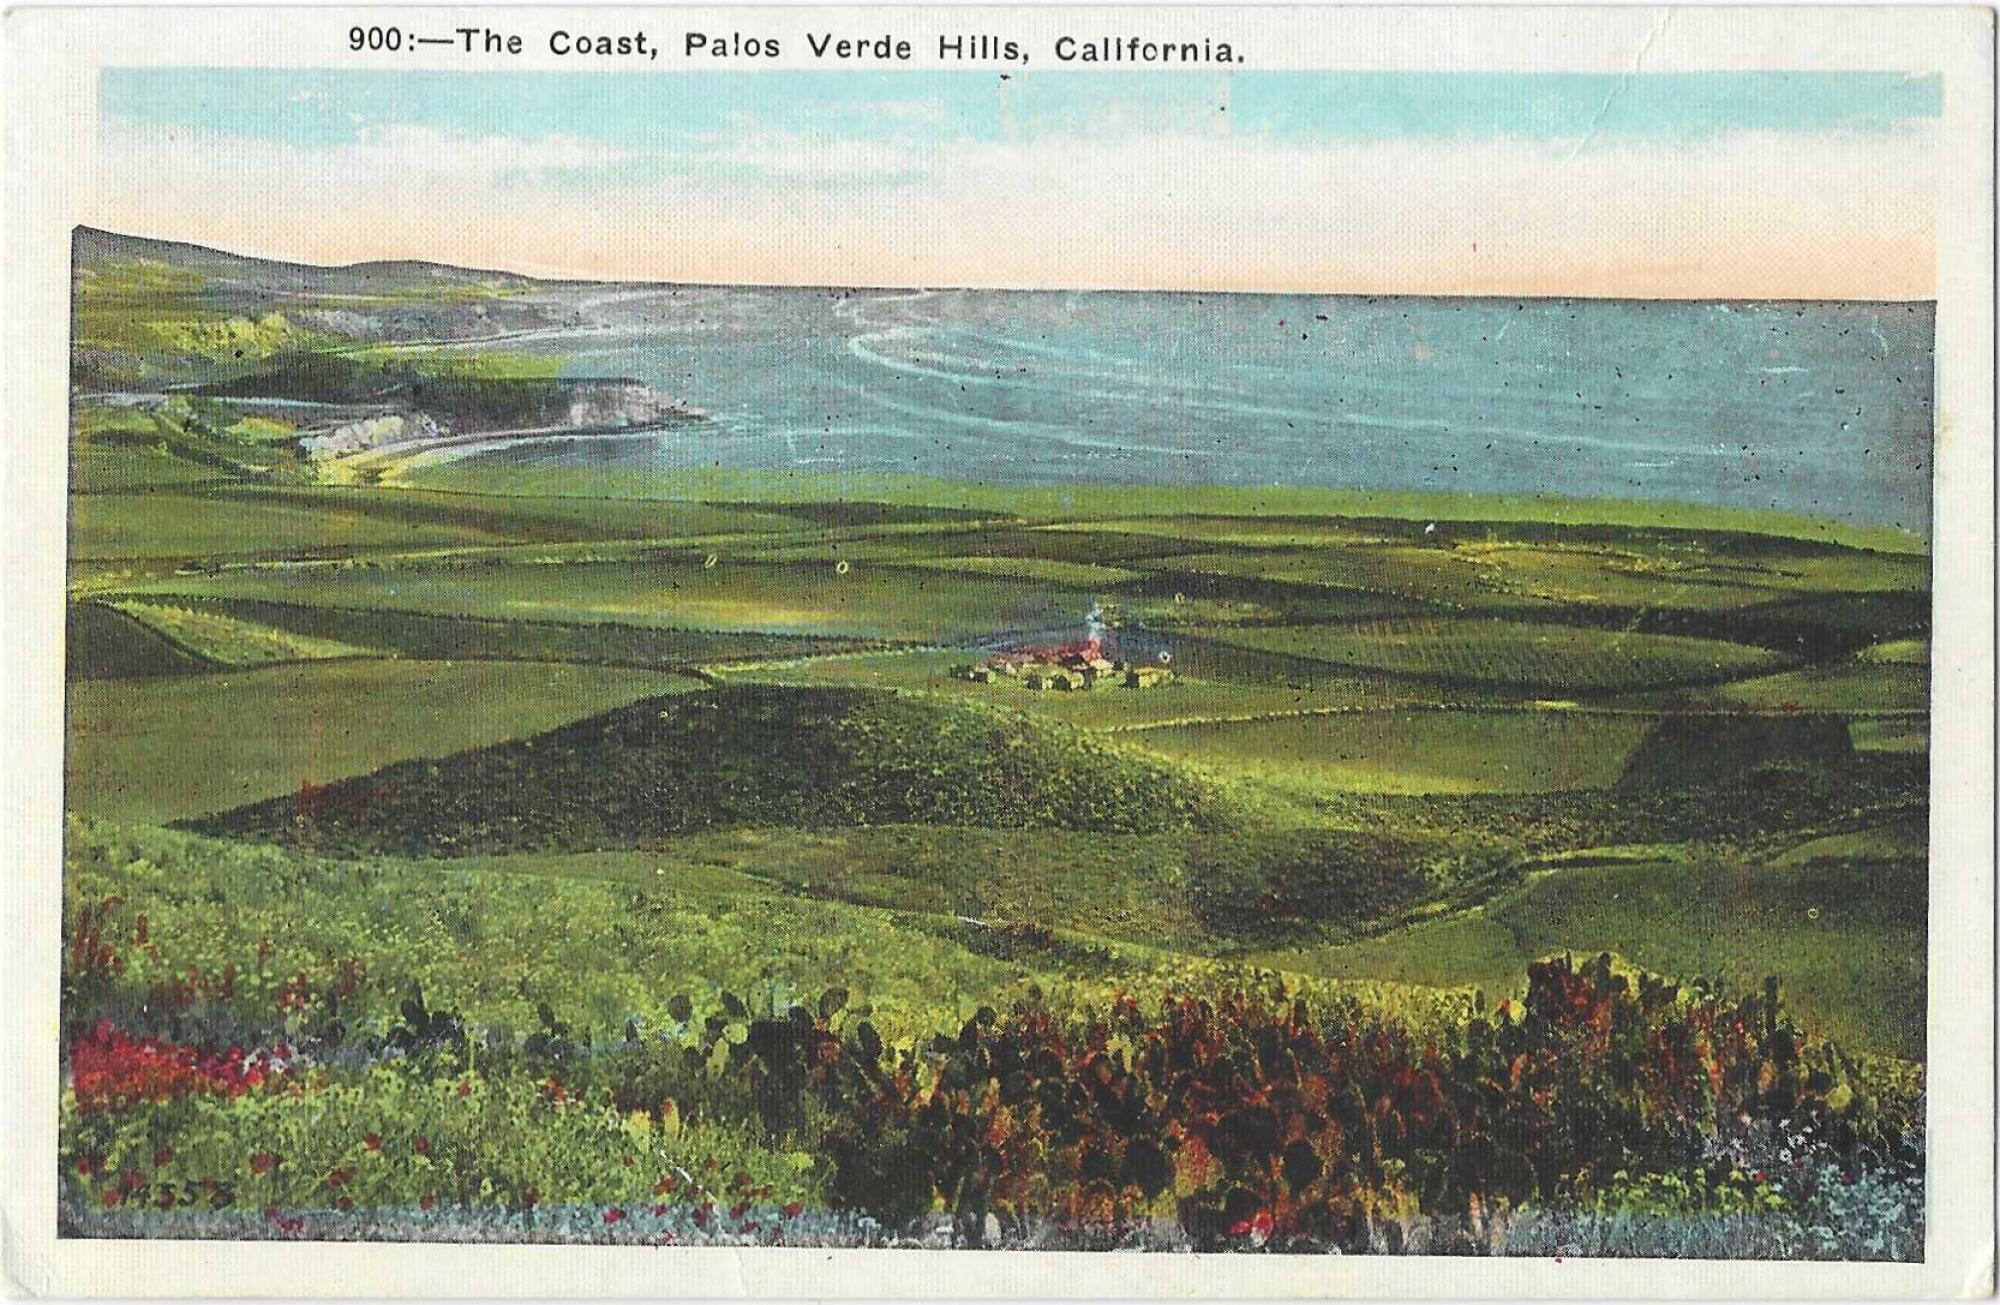 Green hills and a sweeping coastline on a vintage postcard. Text: "The Coast, Palos Verde [sic] Hills, California"